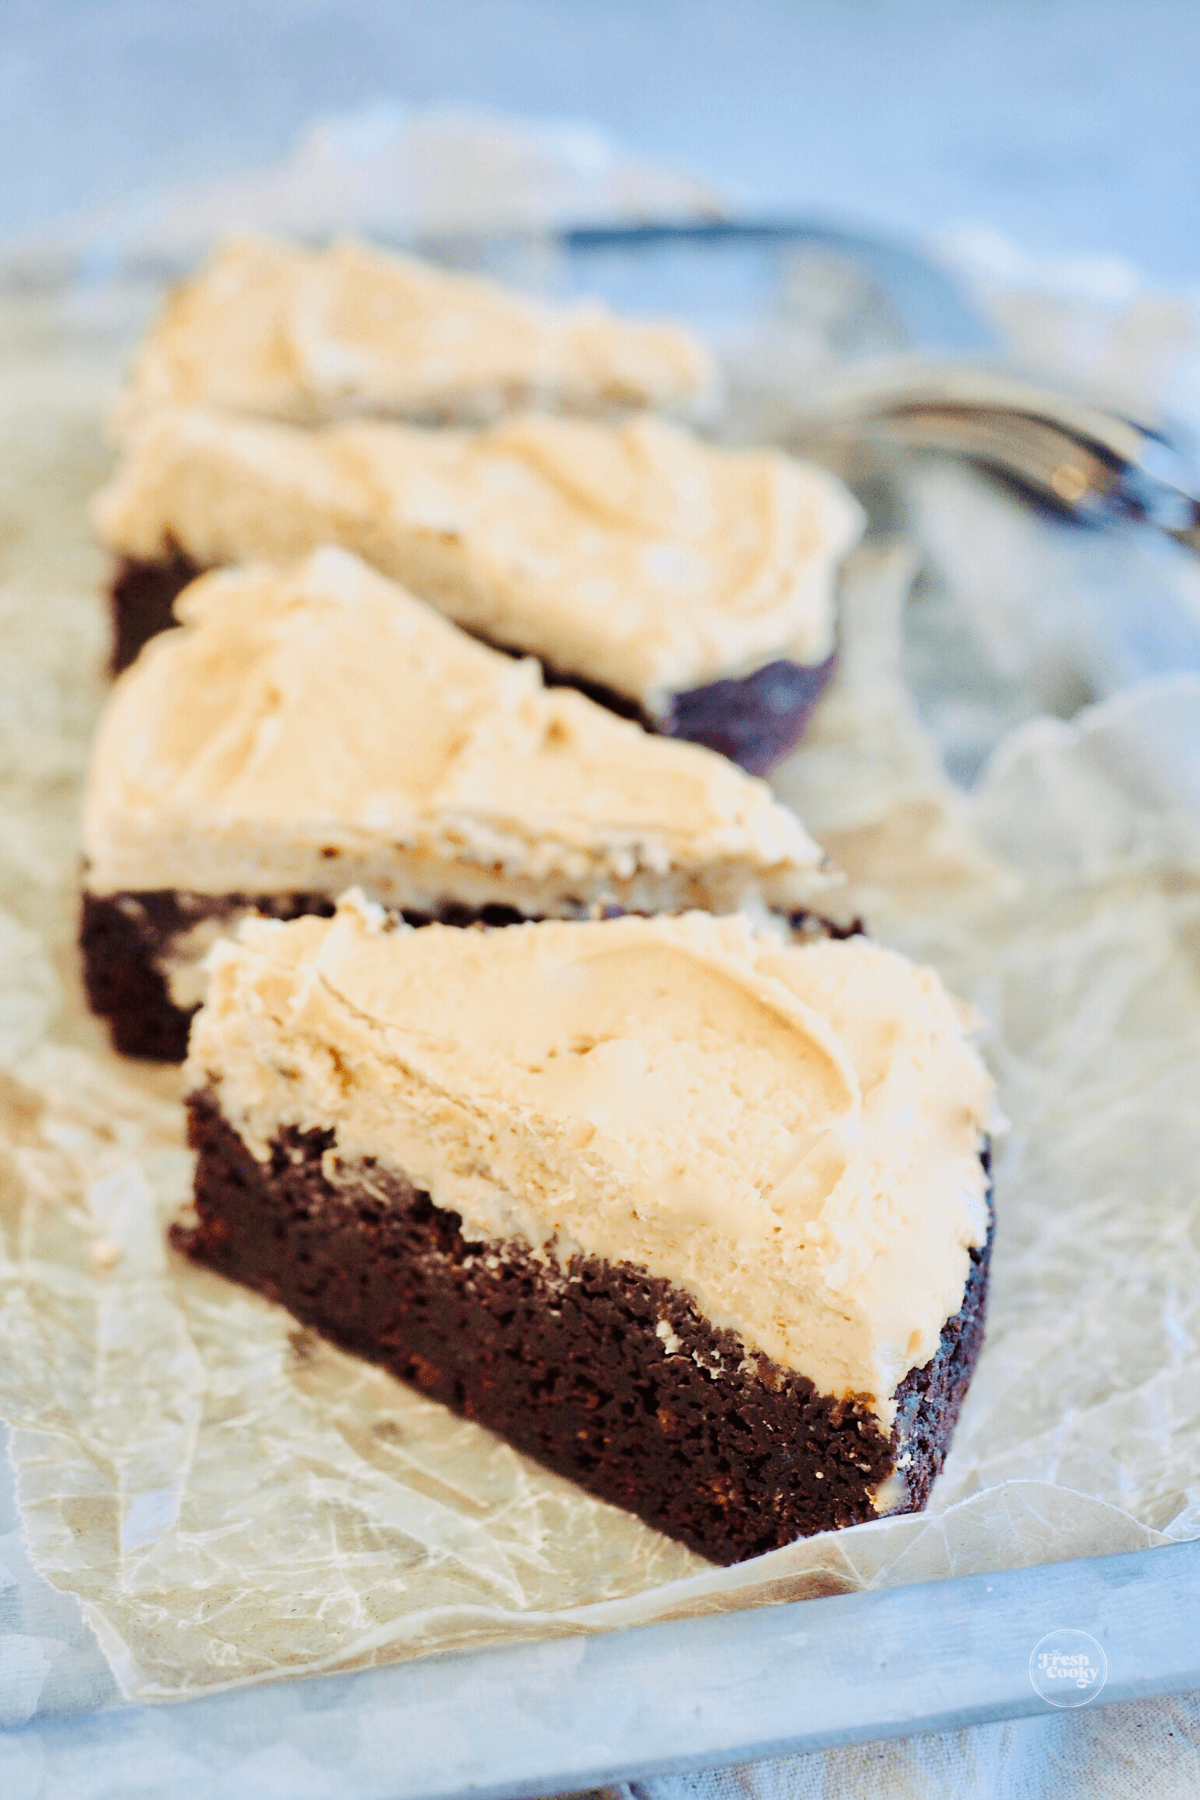 Slices of fudgy, dense chocolate Guinness cake with Baileys frosting.